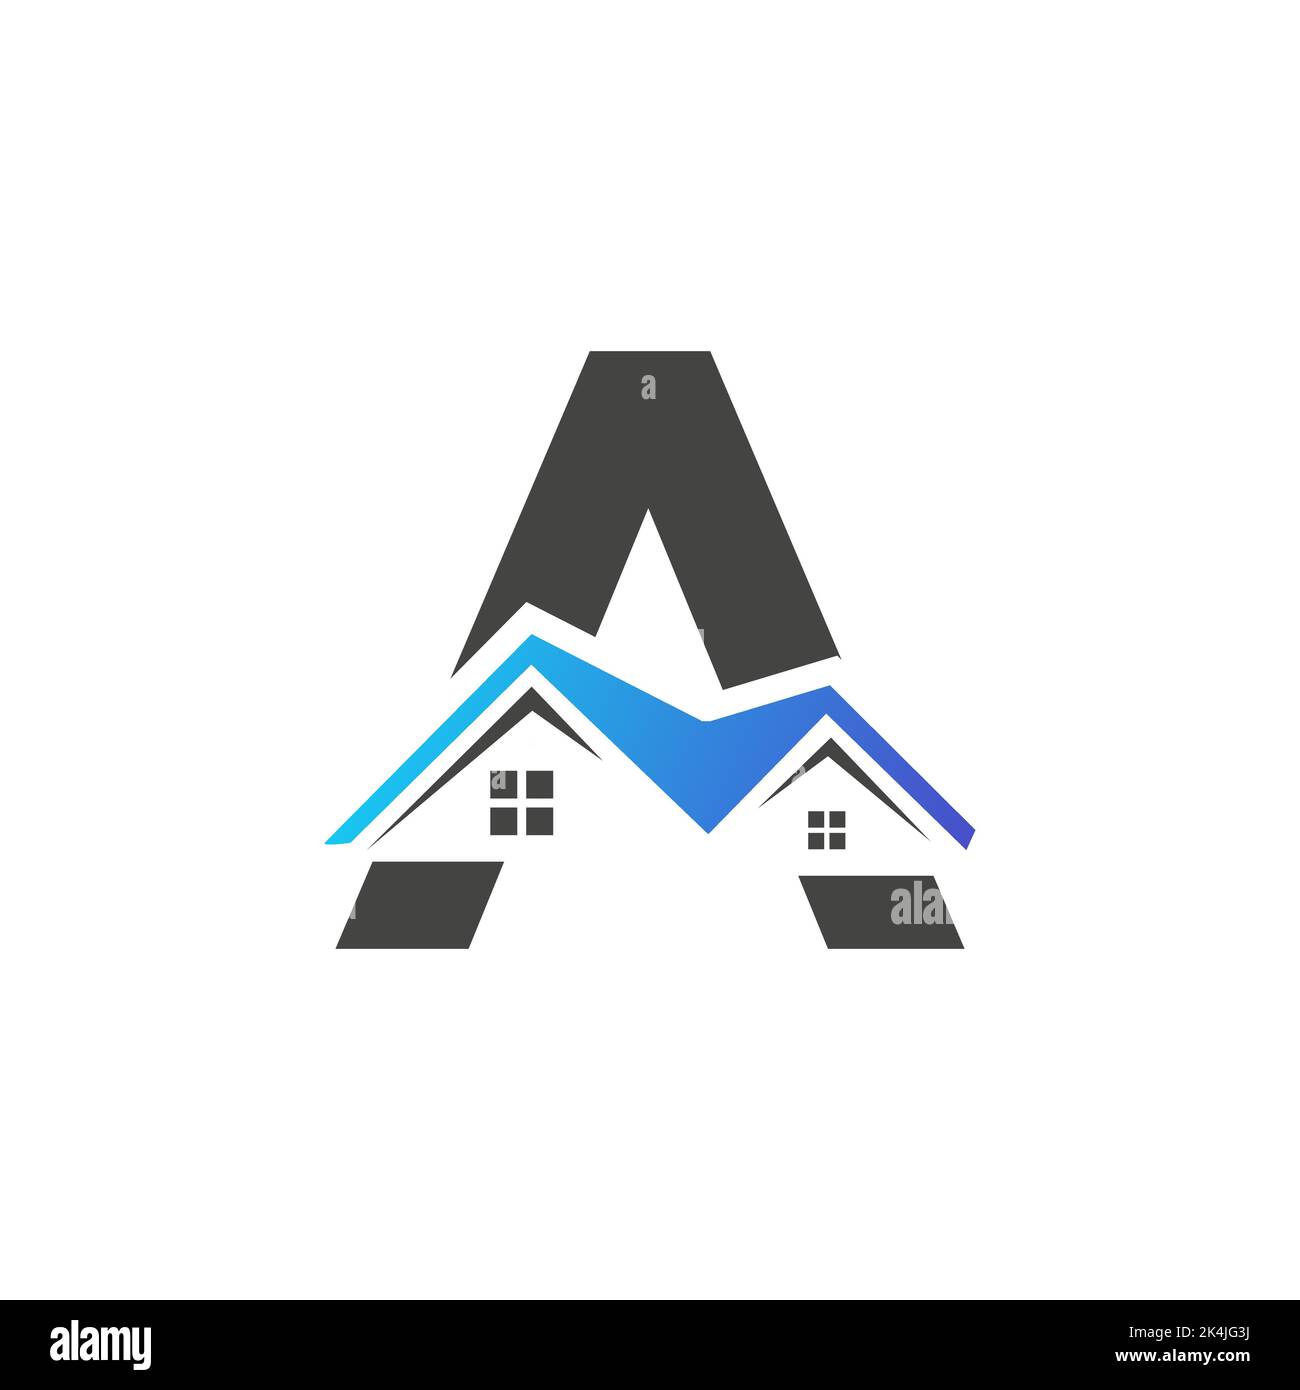 Initial Letter A Real Estate Logo With Building Roof For Investment and Corporate Business Template Stock Vector